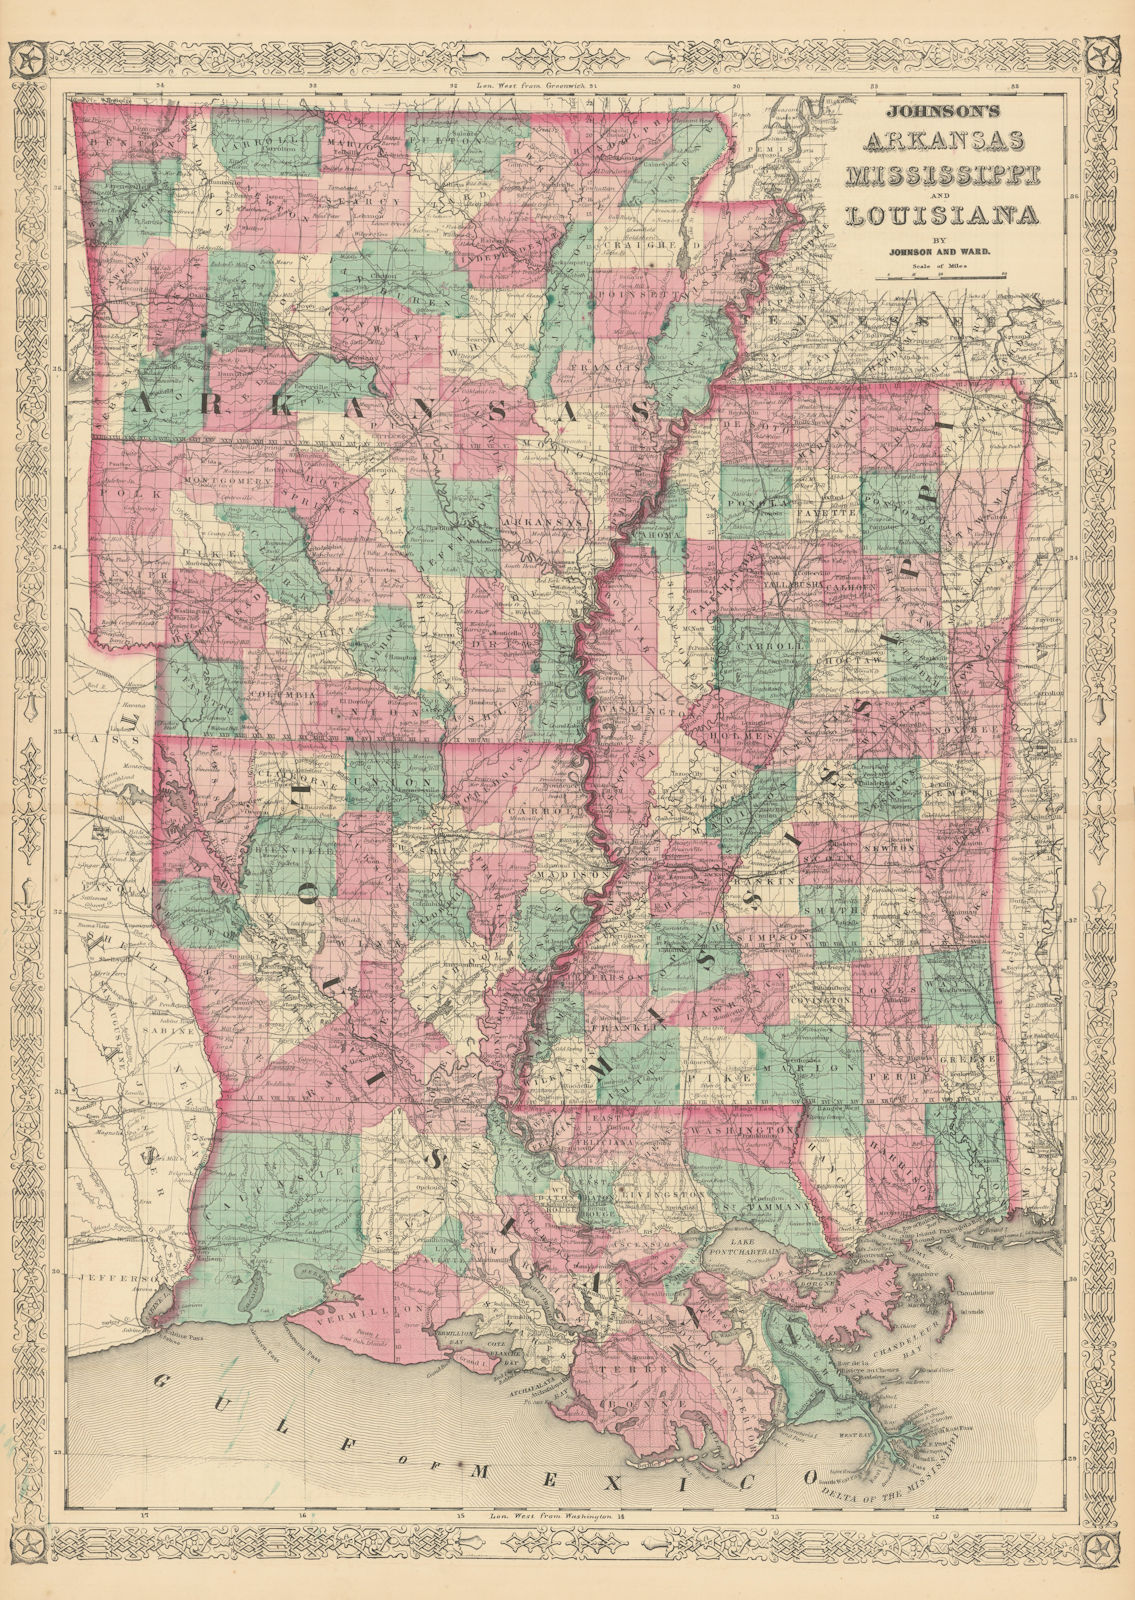 Associate Product Johnson's Arkansas, Mississippi & Louisiana showing counties/parishes 1866 map